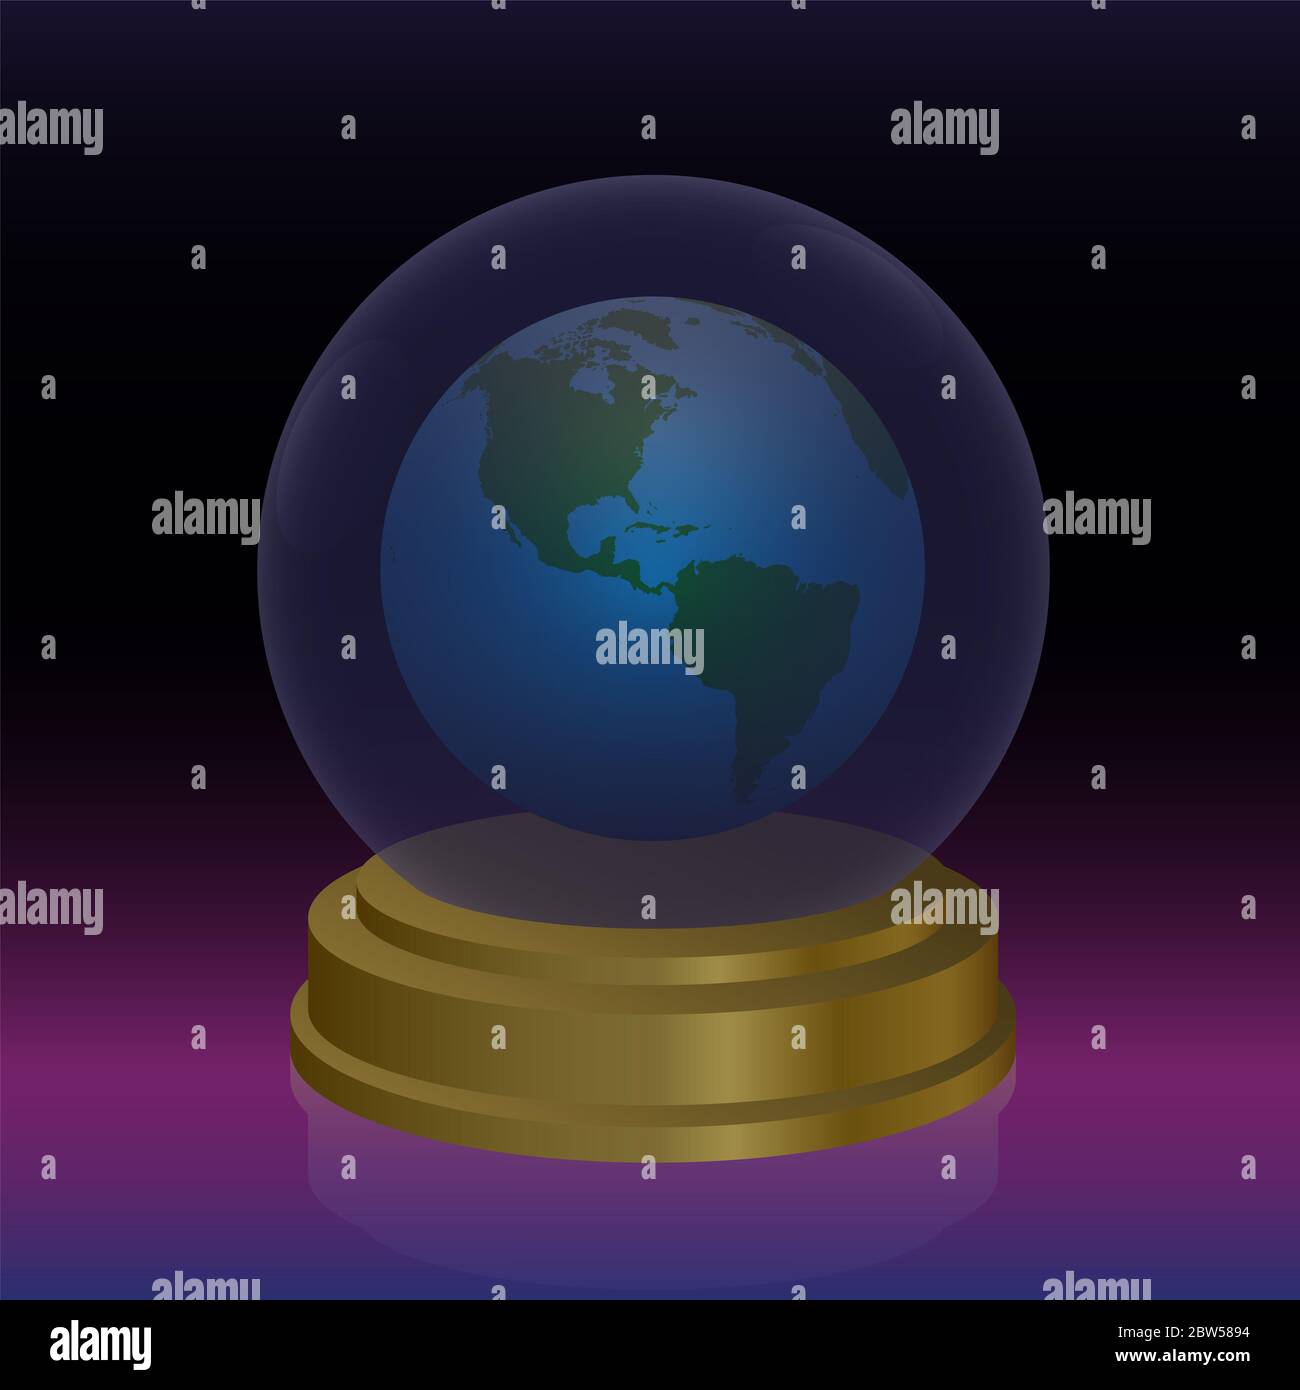 Crystal ball with planet earth. Symbol for forecast, fortune telling, oracle and future prediction of mankind and nature. Stock Photo